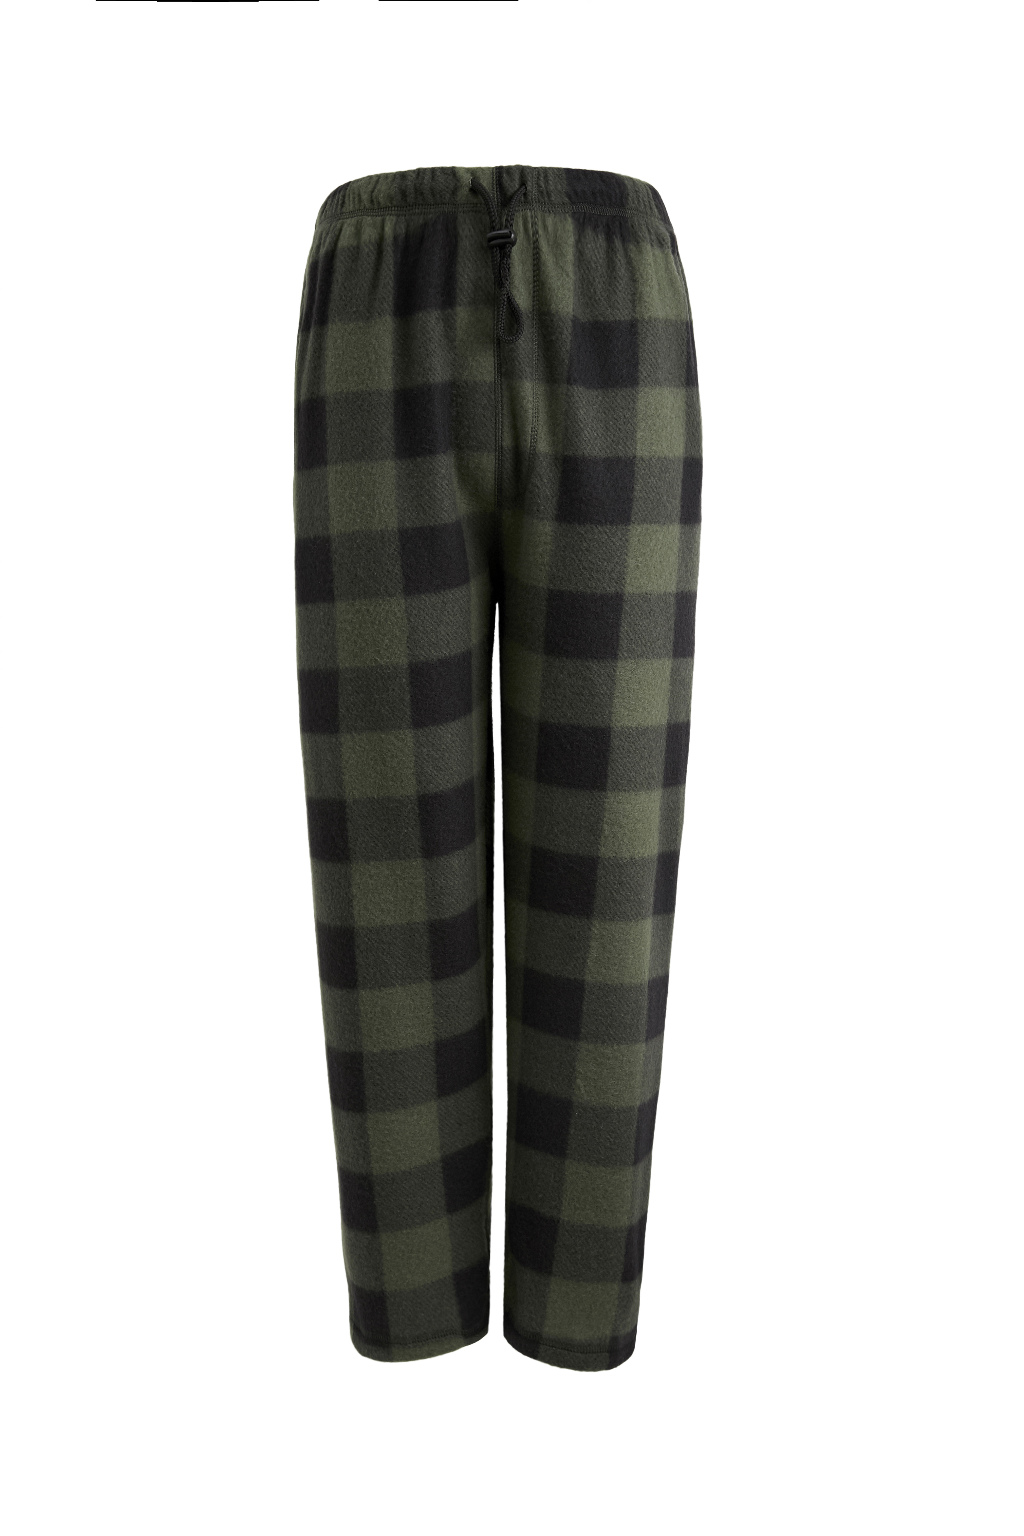 Men's Jersey and Flannel Pajamas - Green